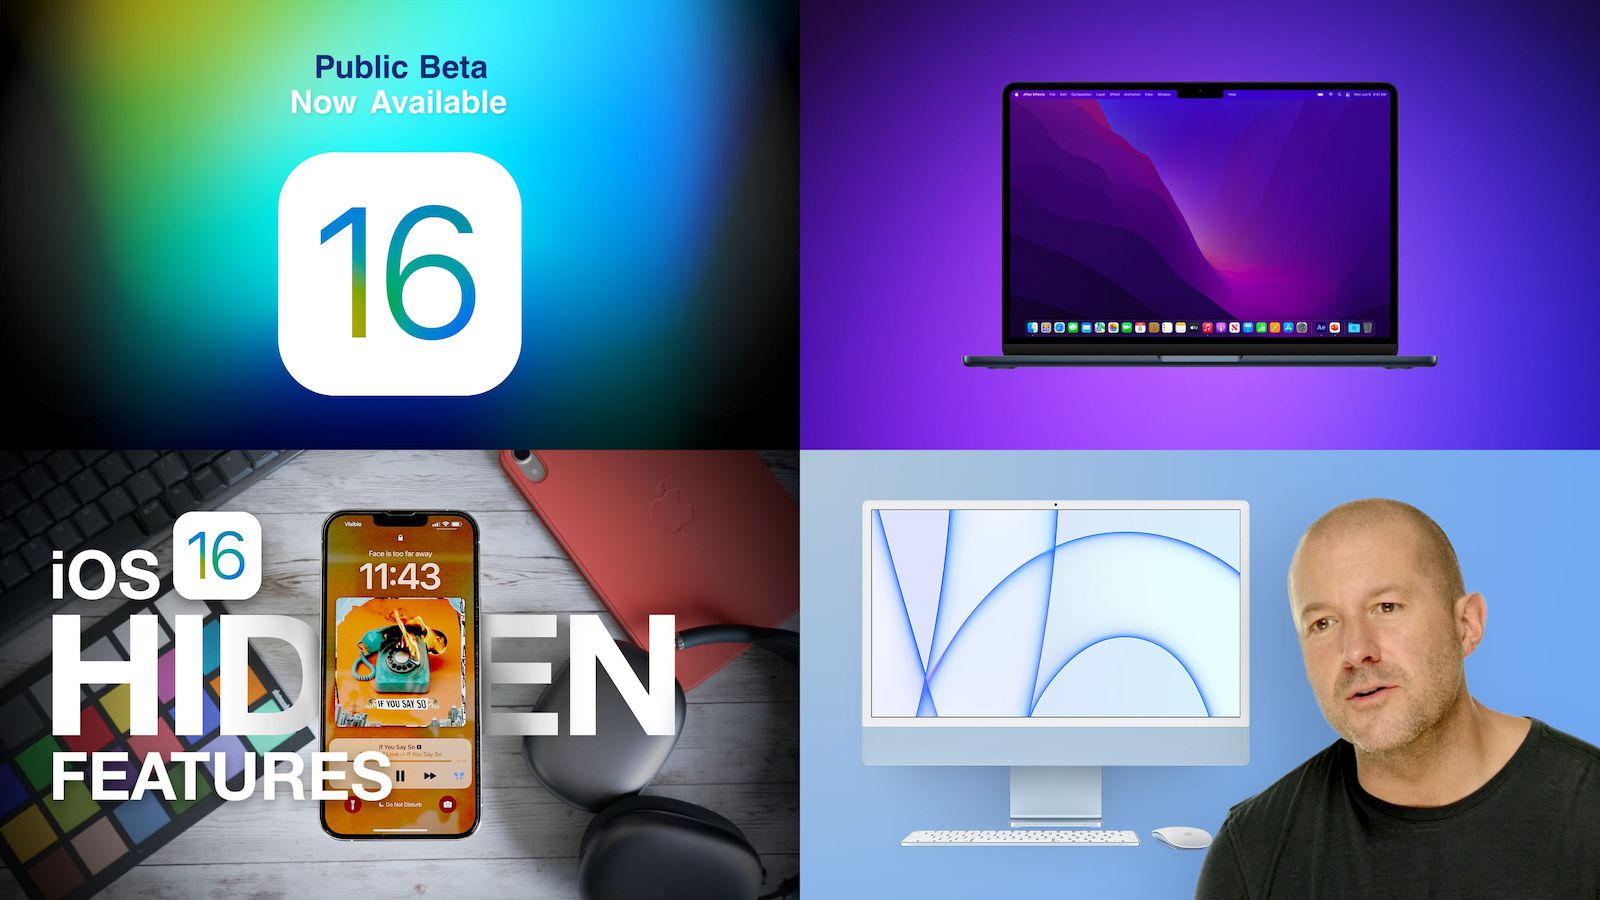 Top Stories: iOS 16 Public Beta, M2 MacBook Air Launch, and More